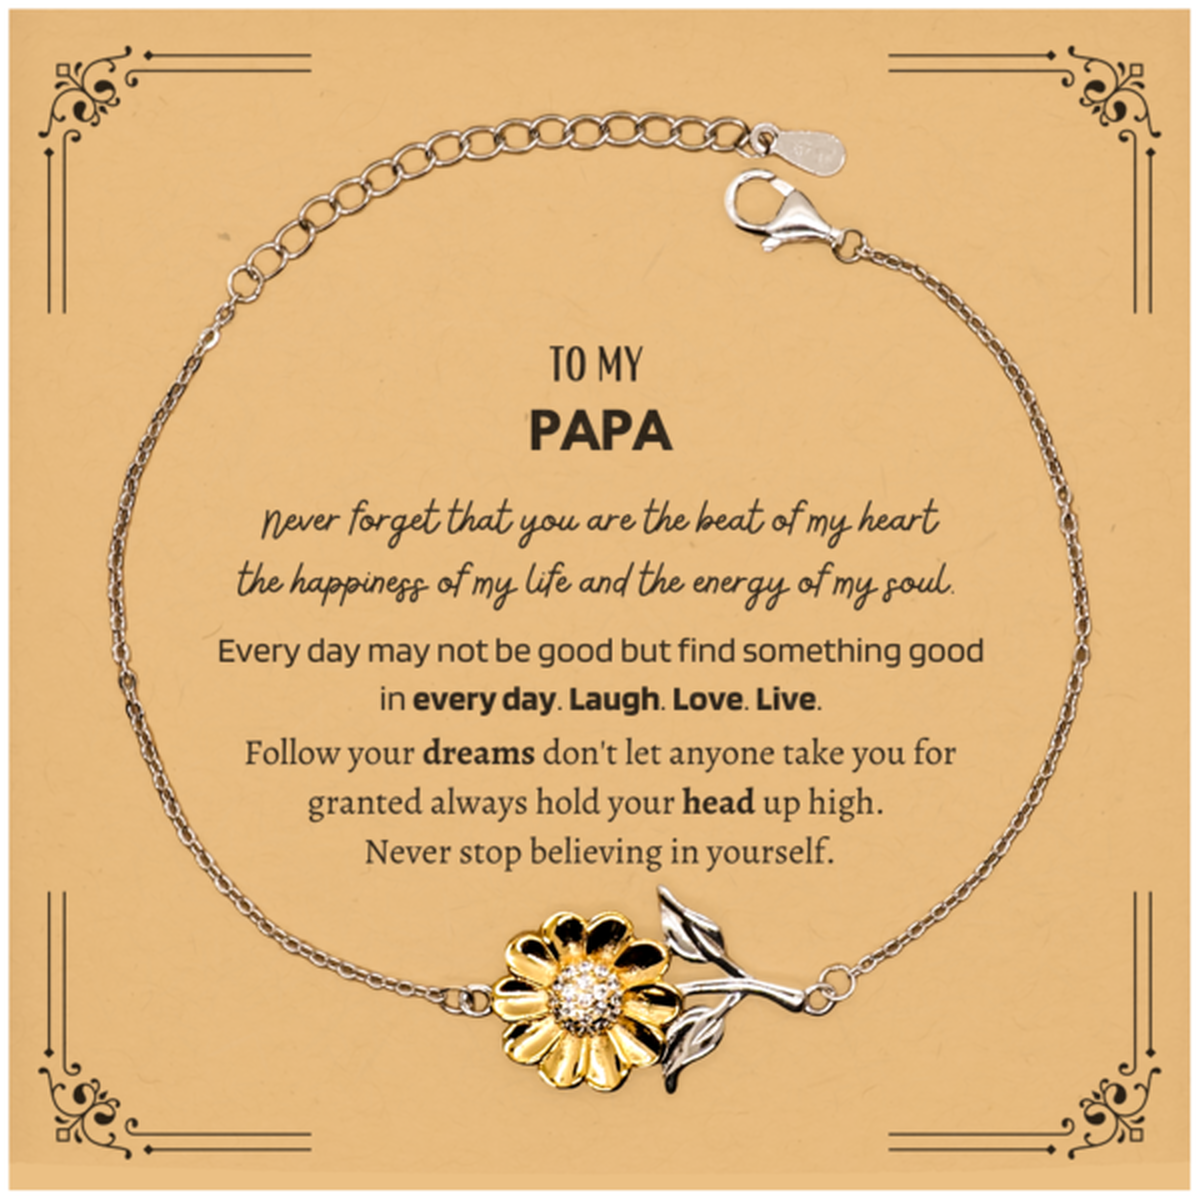 To My Papa Message Card Gifts, Christmas Papa Sunflower Bracelet Present, Birthday Unique Motivational For Papa, To My Papa Never forget that you are the beat of my heart the happiness of my life and the energy of my soul